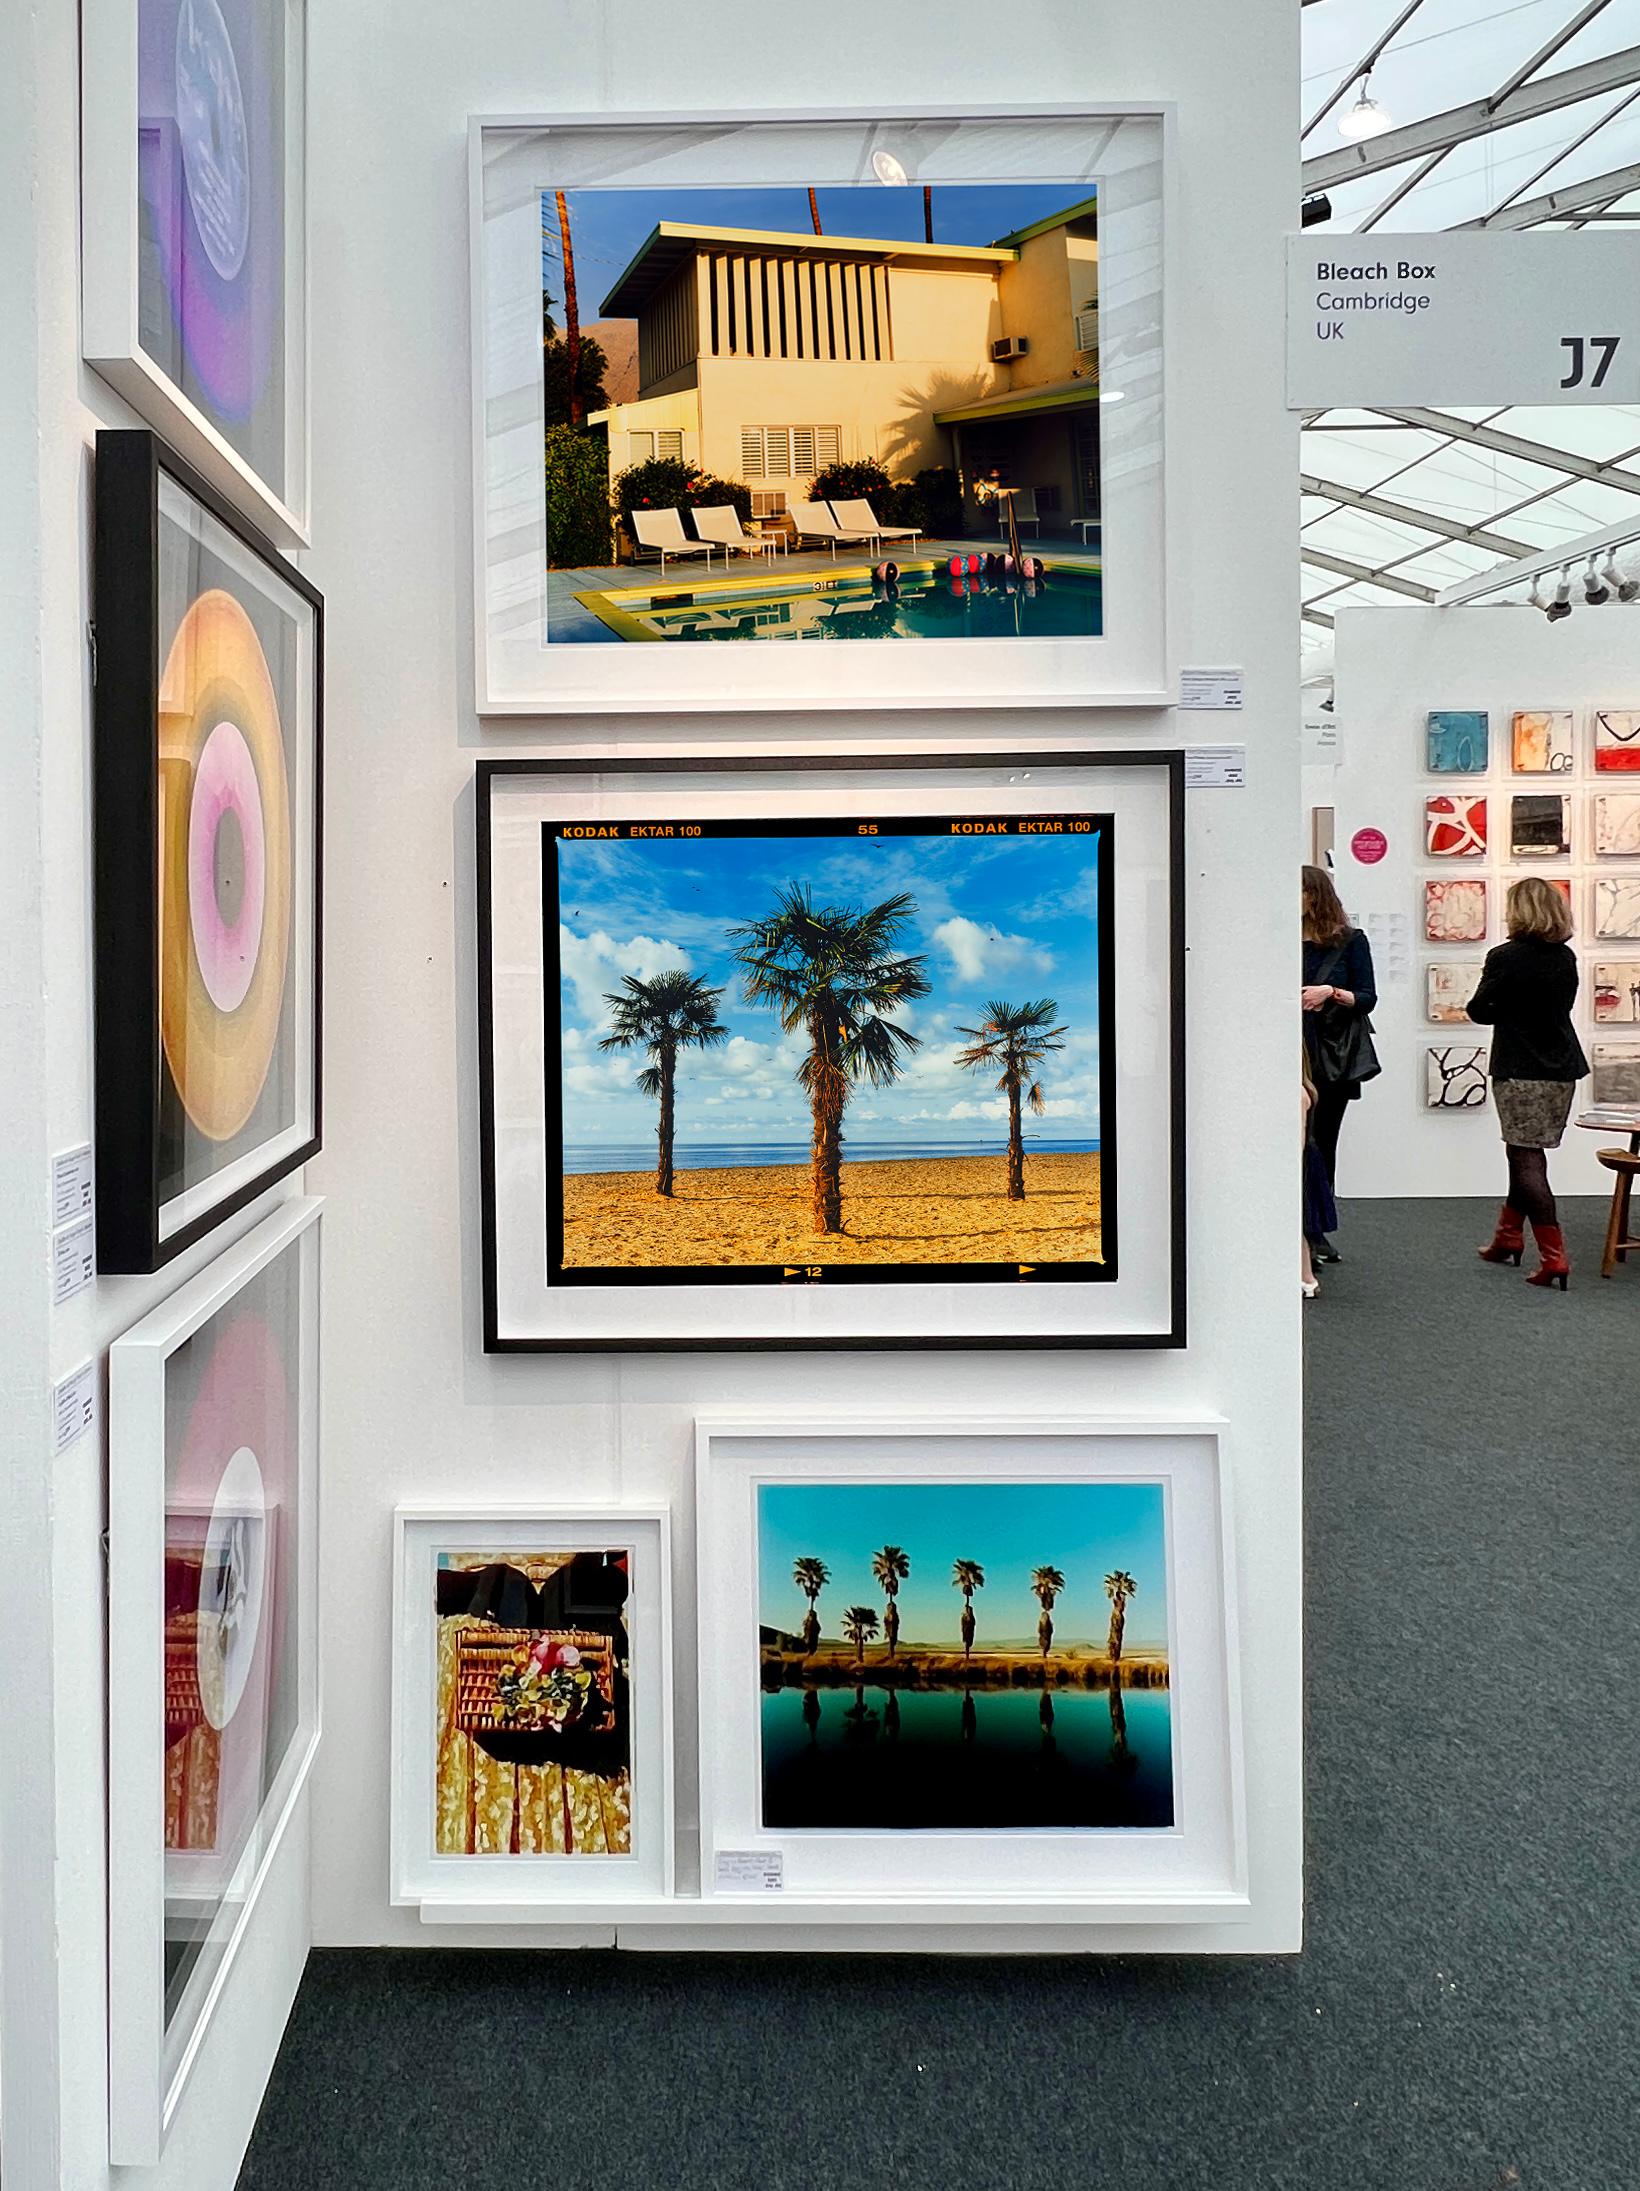 'Three Palms' from Richard Heeps Great British staycation series, On-Sea. Taken in Clacton-on-Sea, Richard was channeling Hitchcock in his mind, printed in his darkroom full frame with the Kodak film rebate.

This artwork is a limited edition of 25,